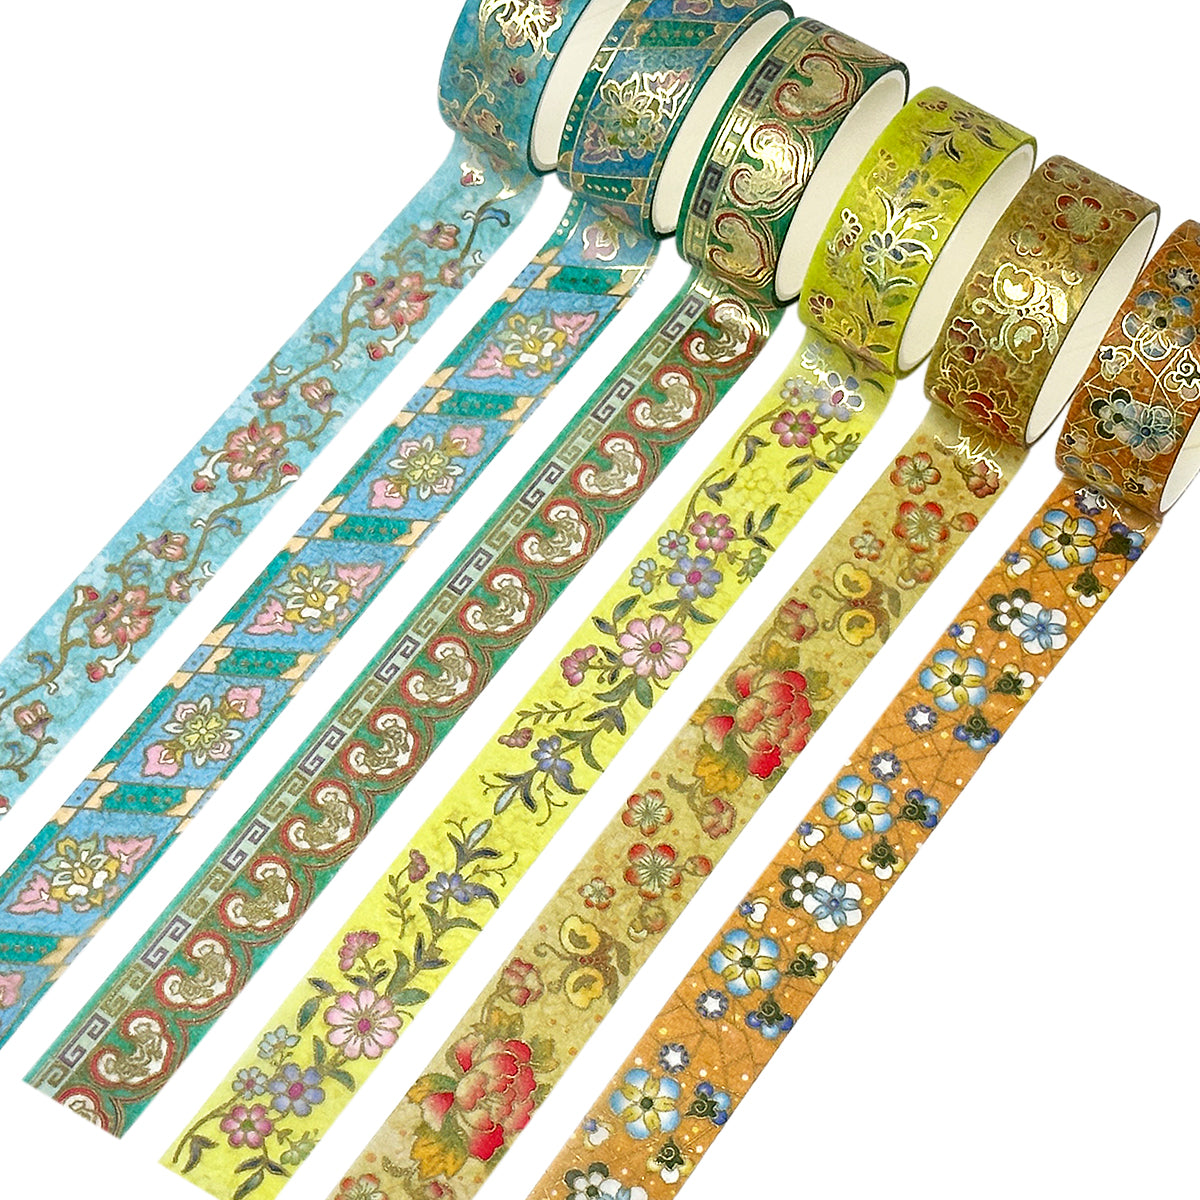 Wrapables Elegant Gold Foil Washi Tape Box Set for Arts & Crafts, Scrapbooking, Stationery, Diary (12 Rolls) Romantic Floral